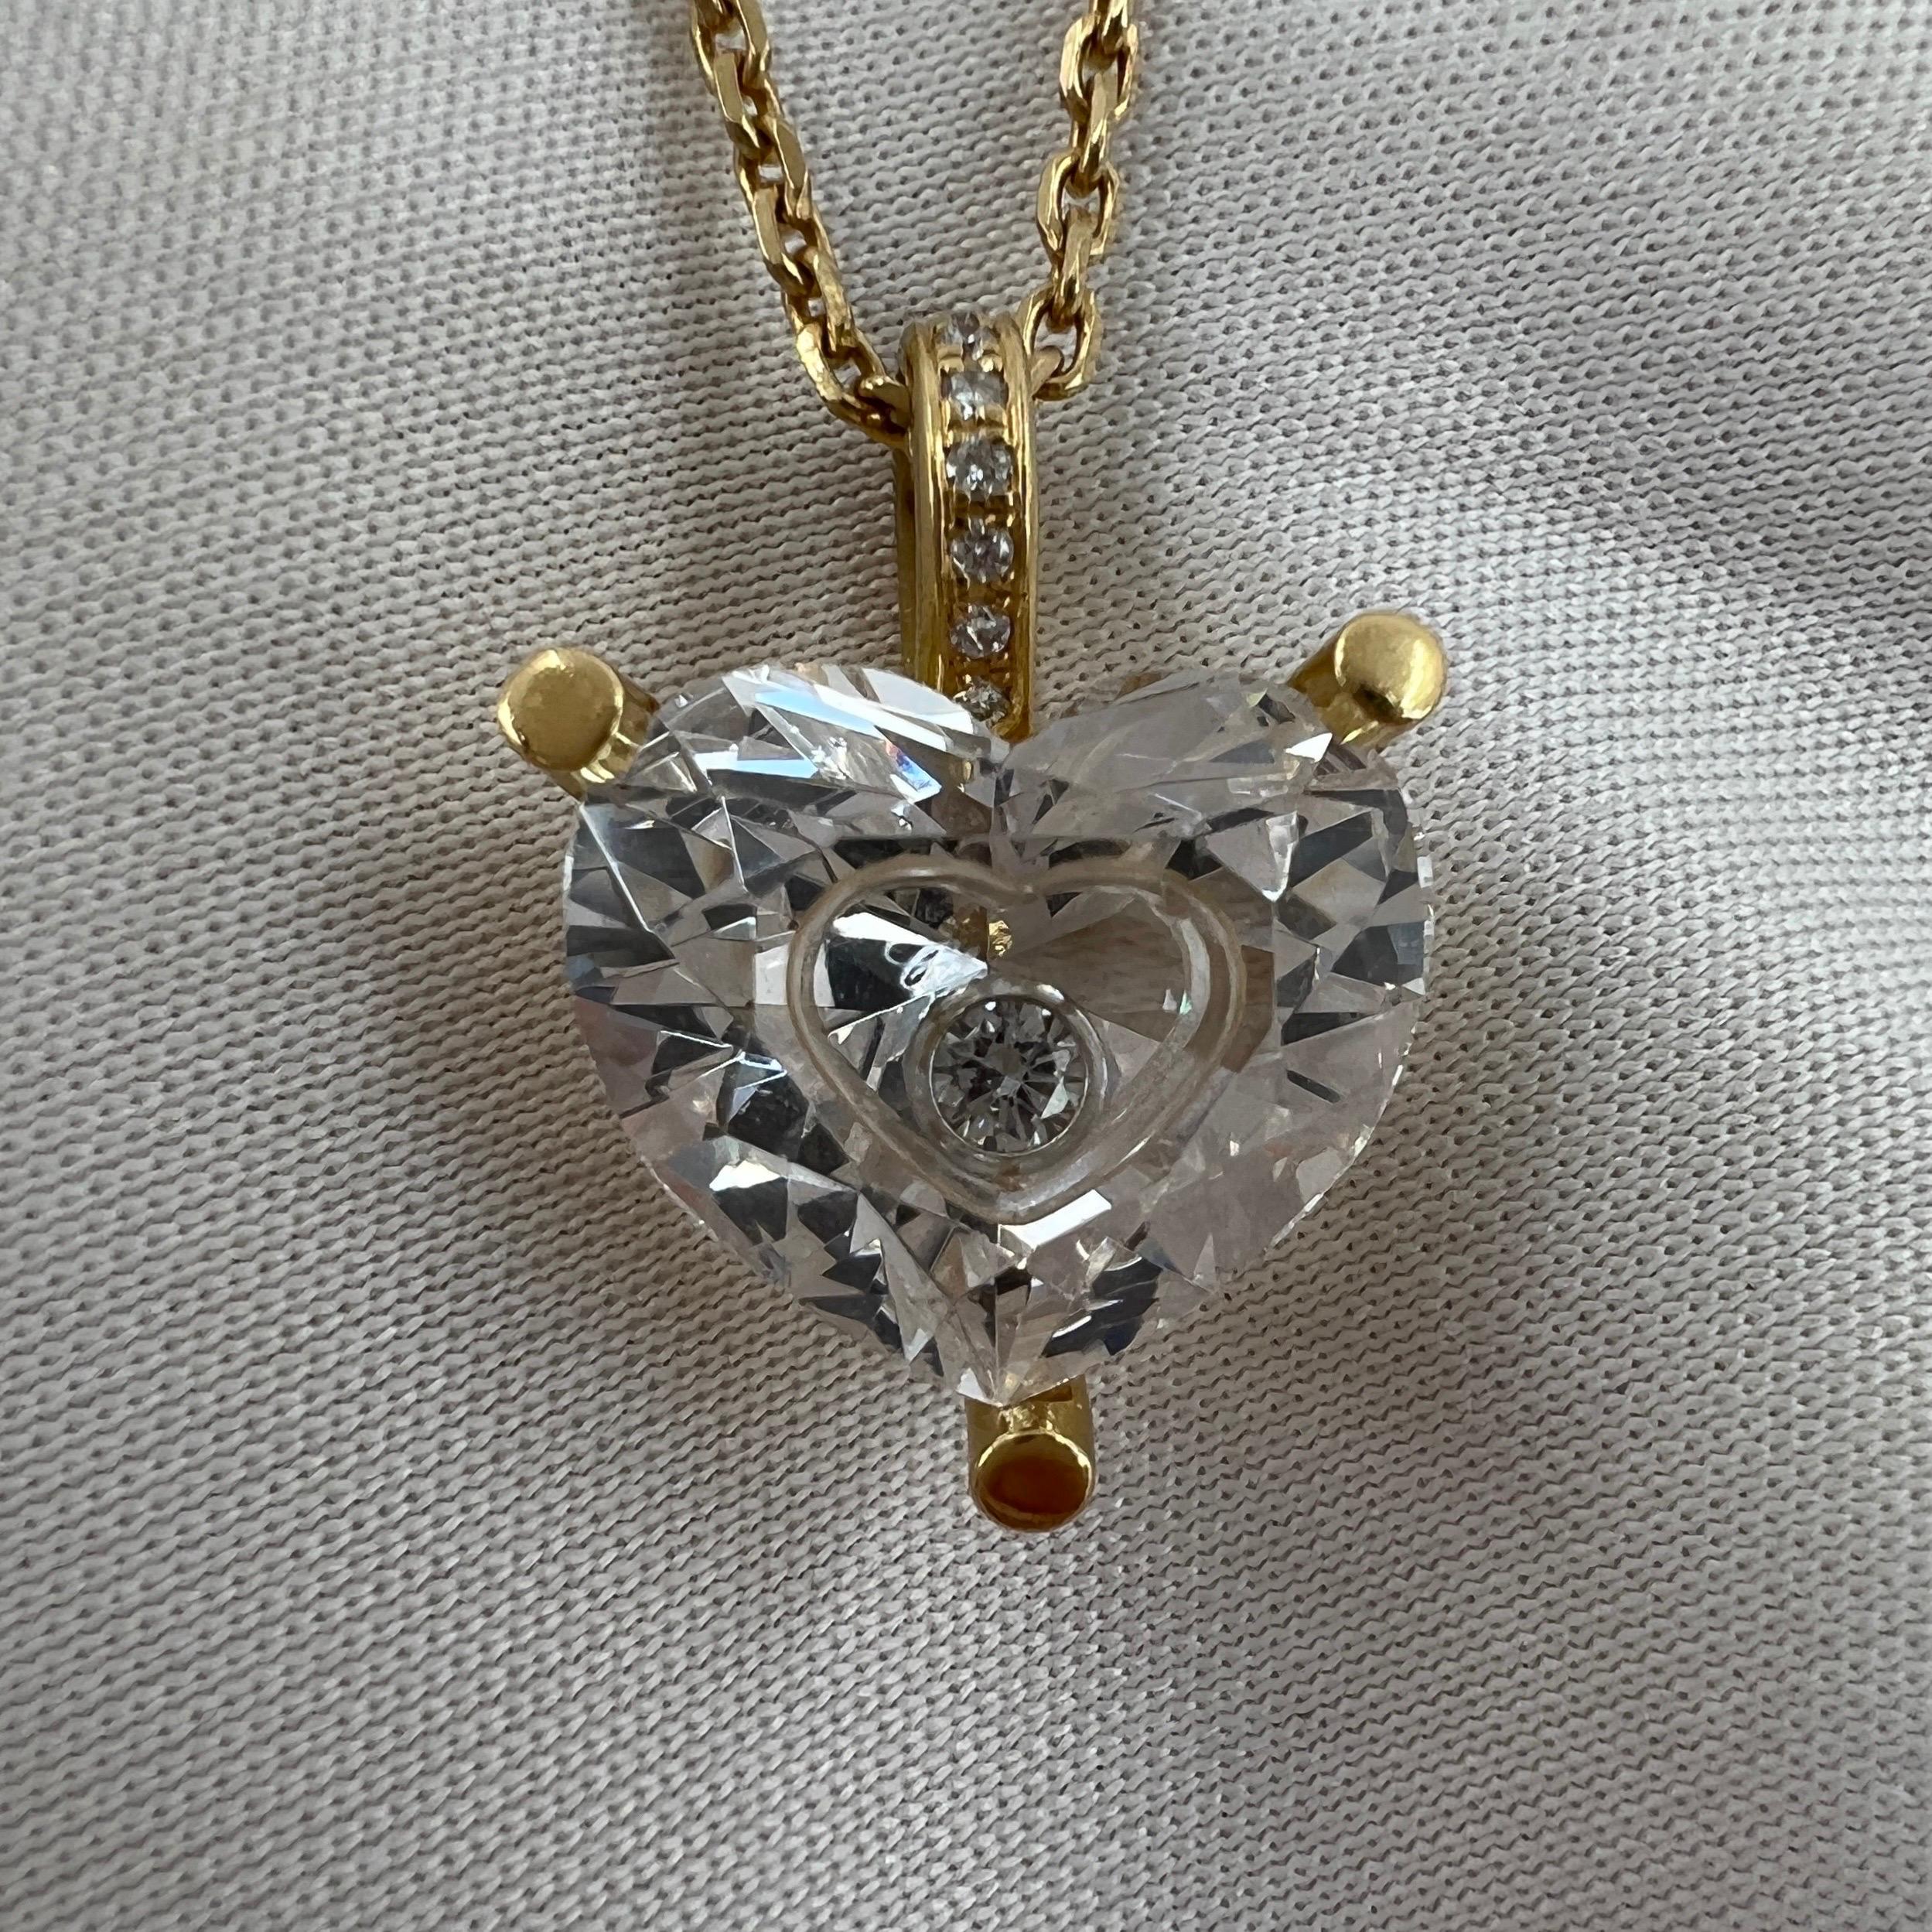 Women's or Men's Chopard So Happy Diamonds Heart 18k Yellow Gold Pendant Necklace with Box